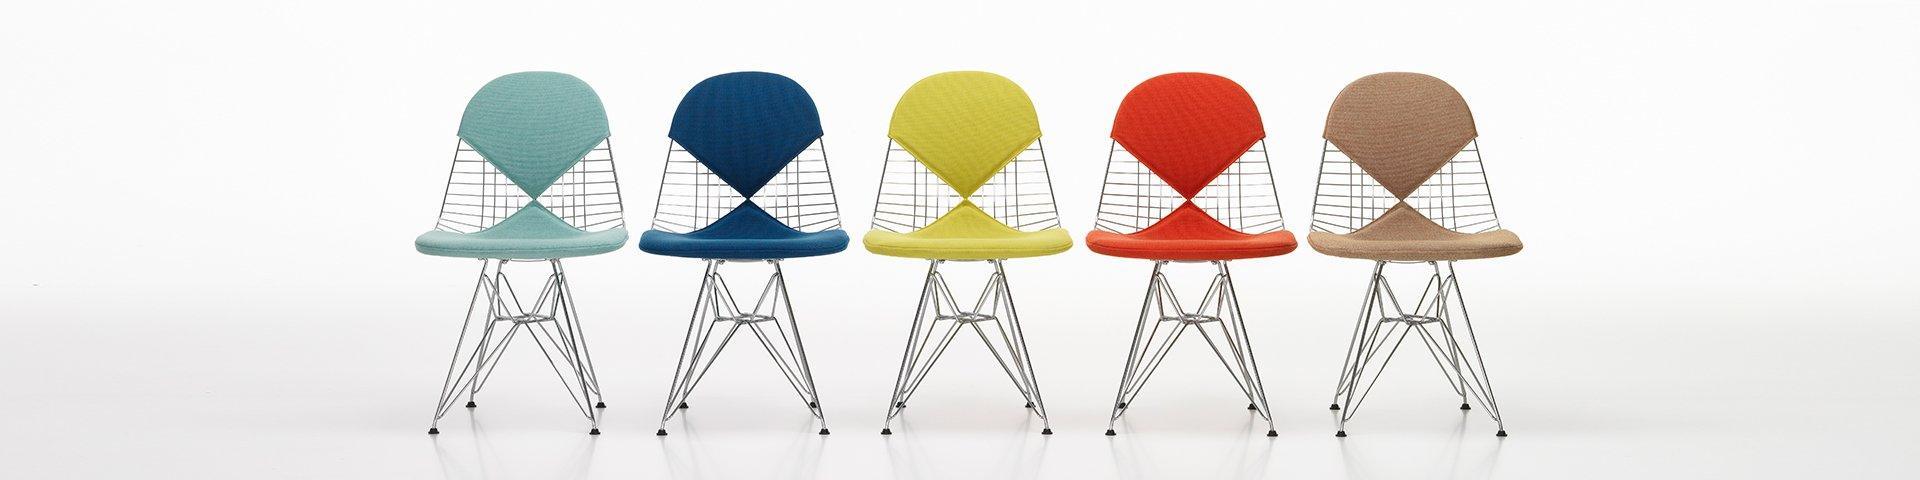 Eames DKR wire chair with upholstery, 1951